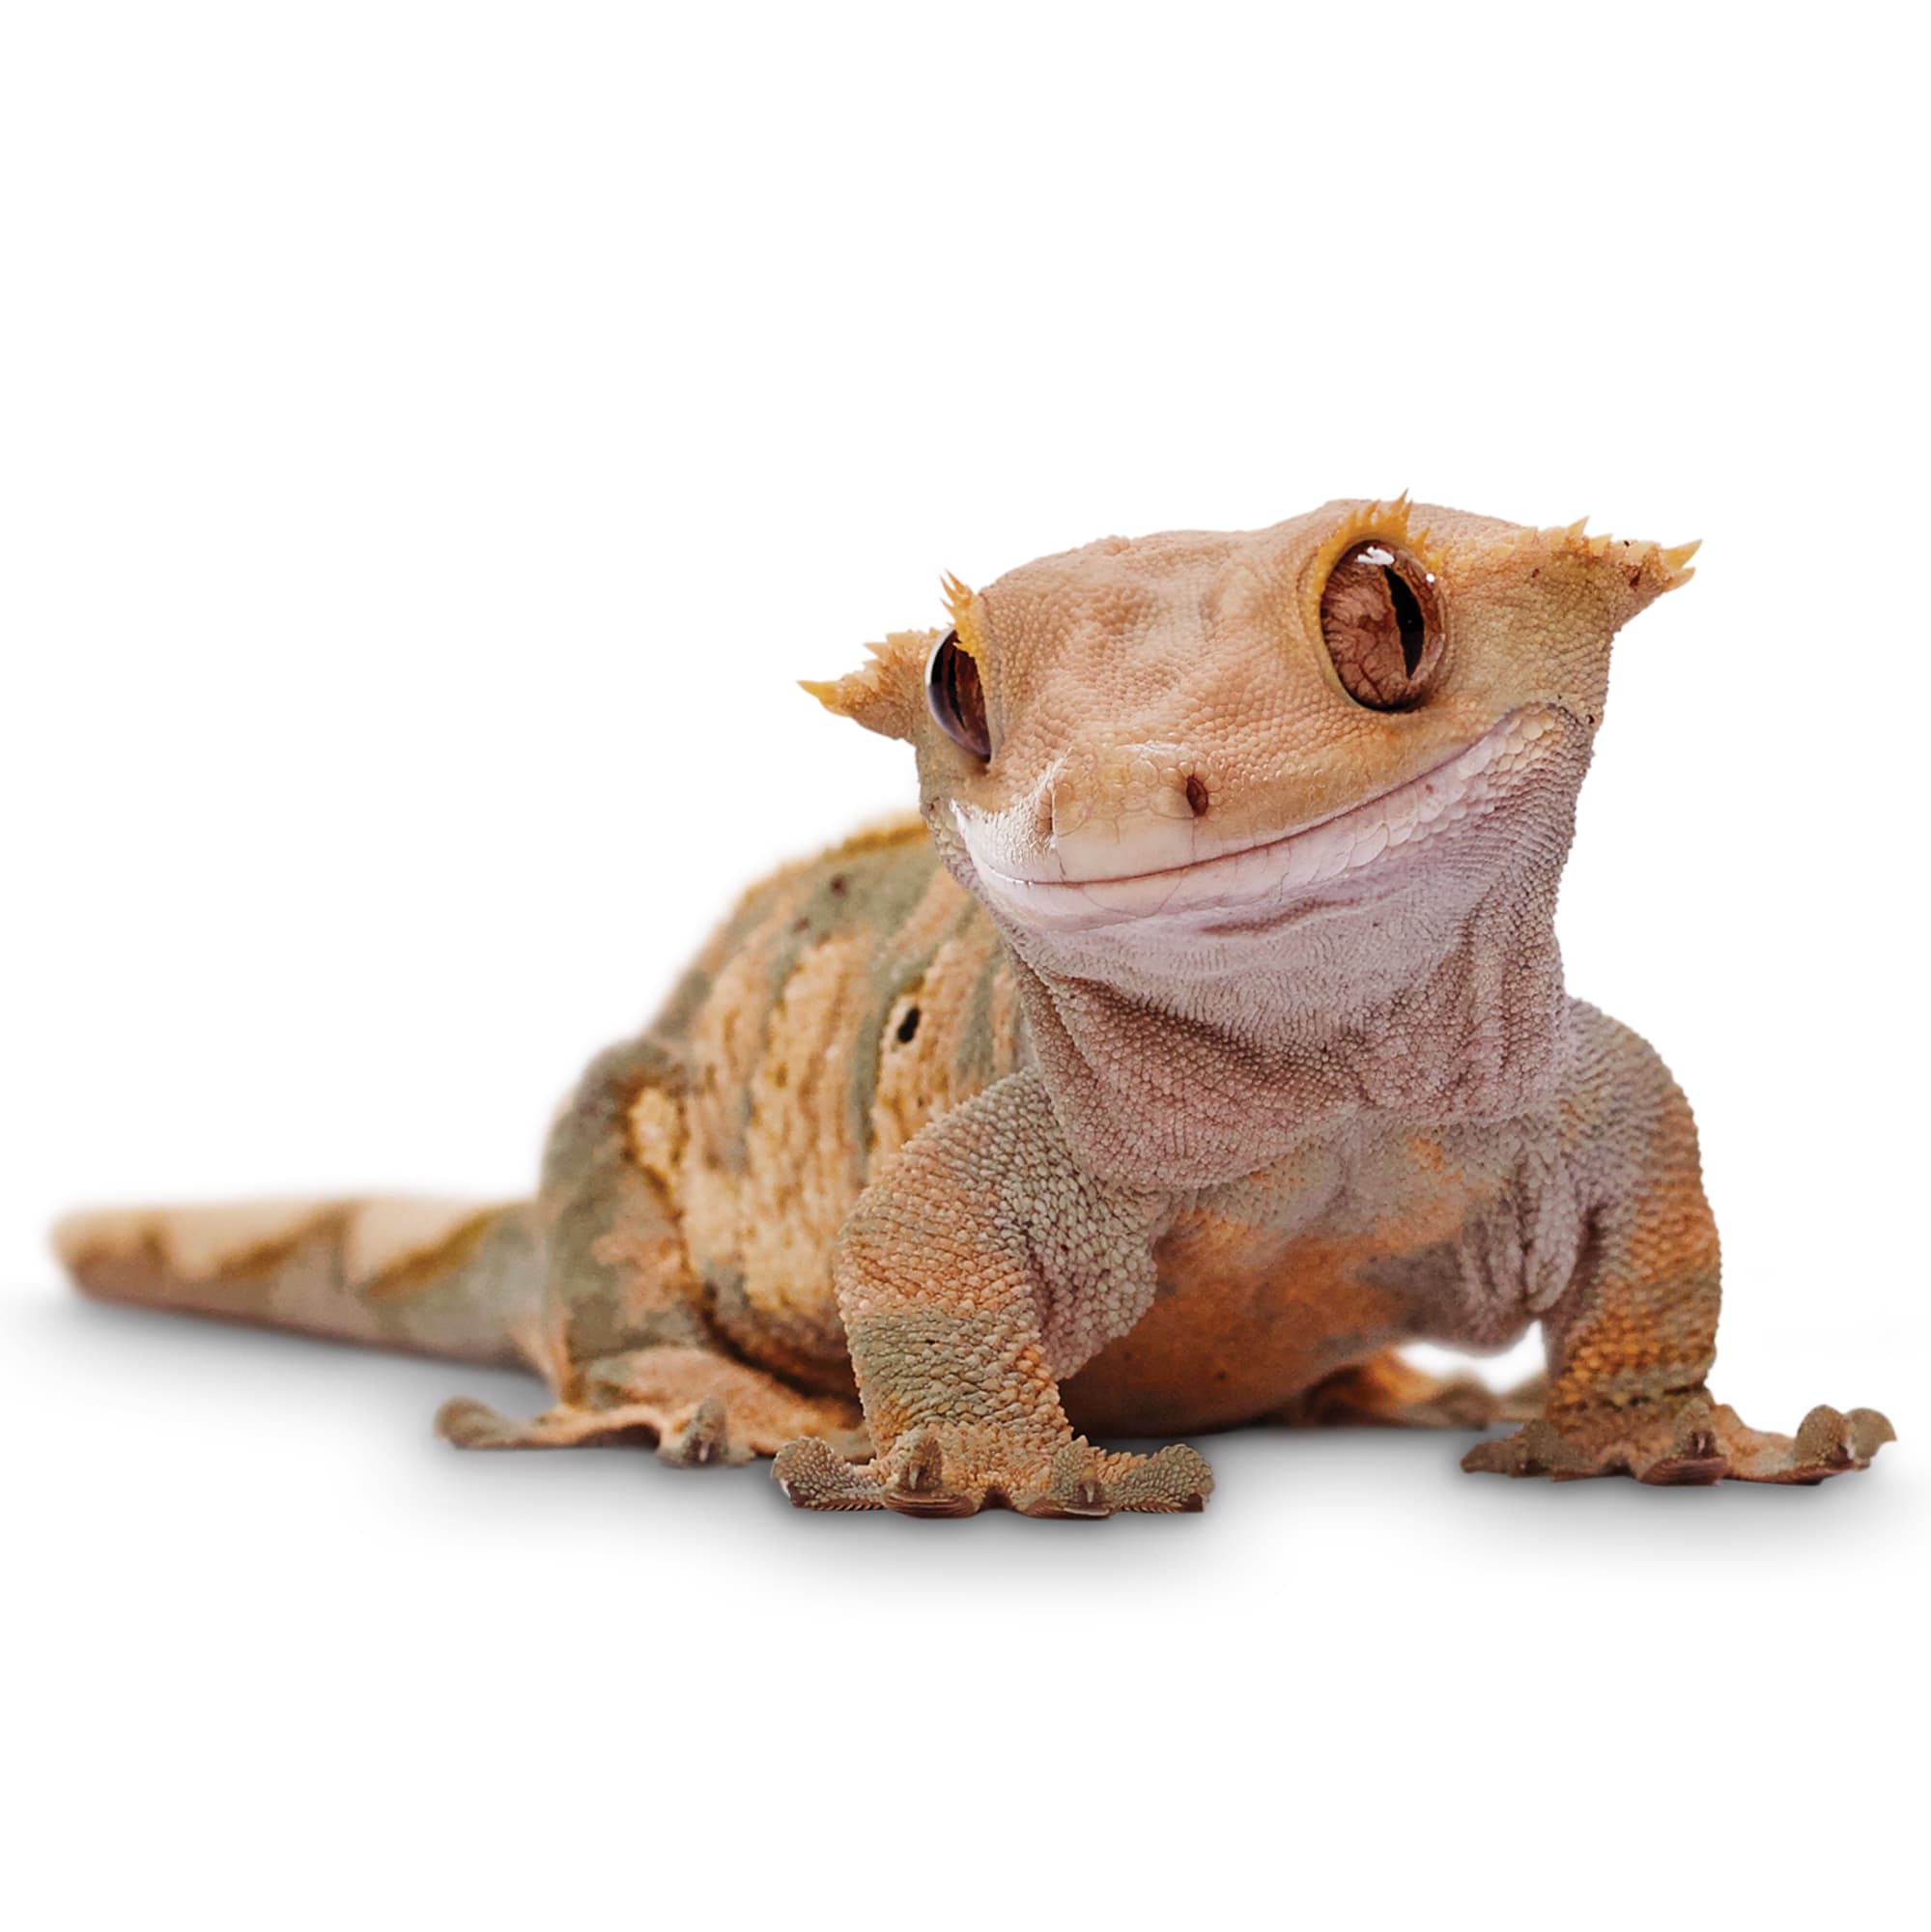 How Much Do Crested Geckos Cost?